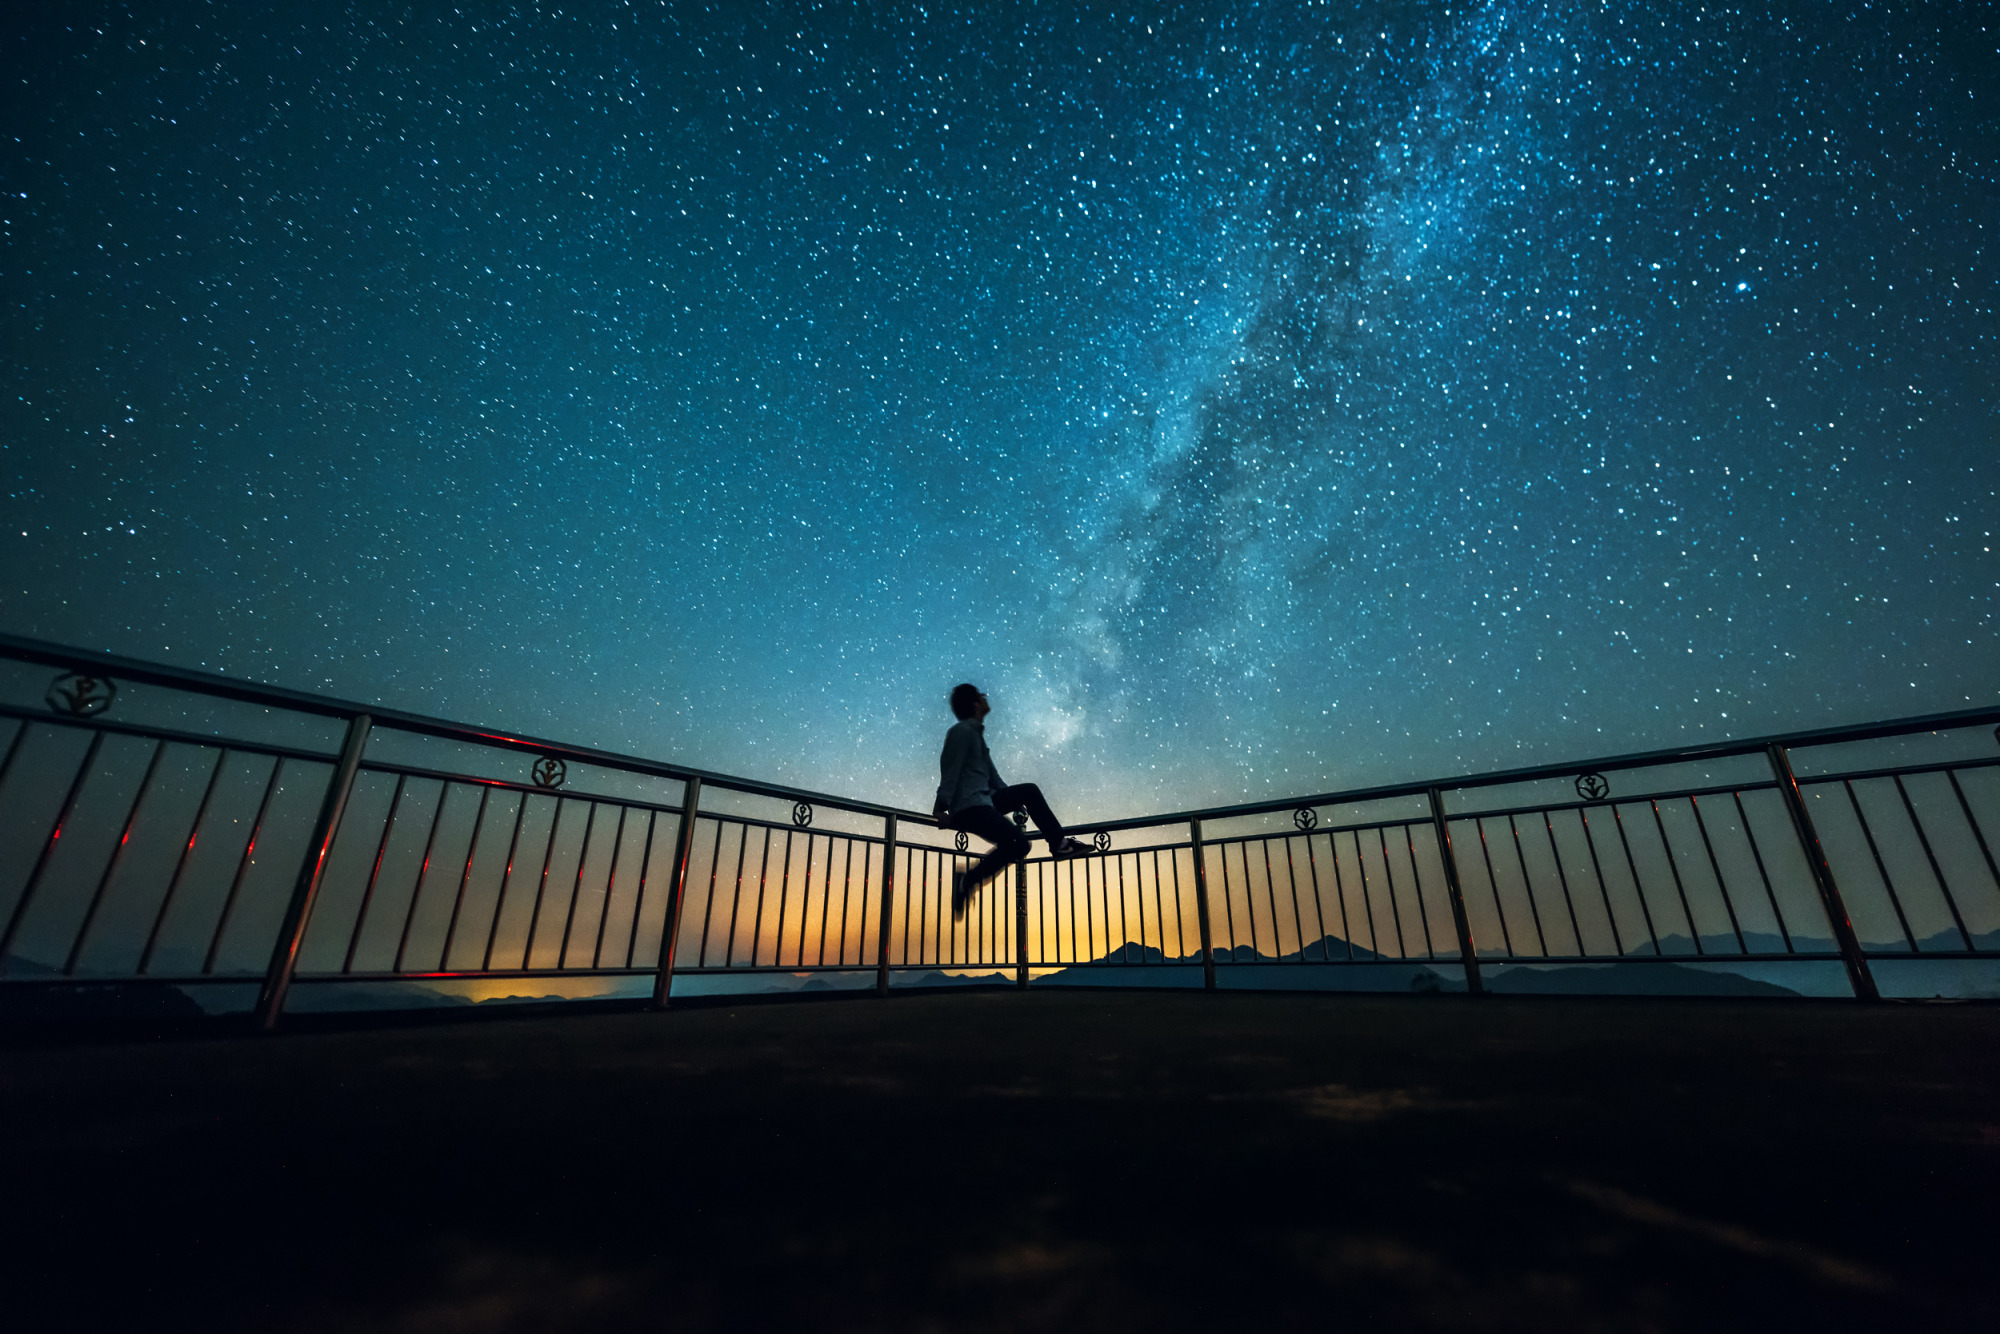 image of a male figure staring out into the night sky